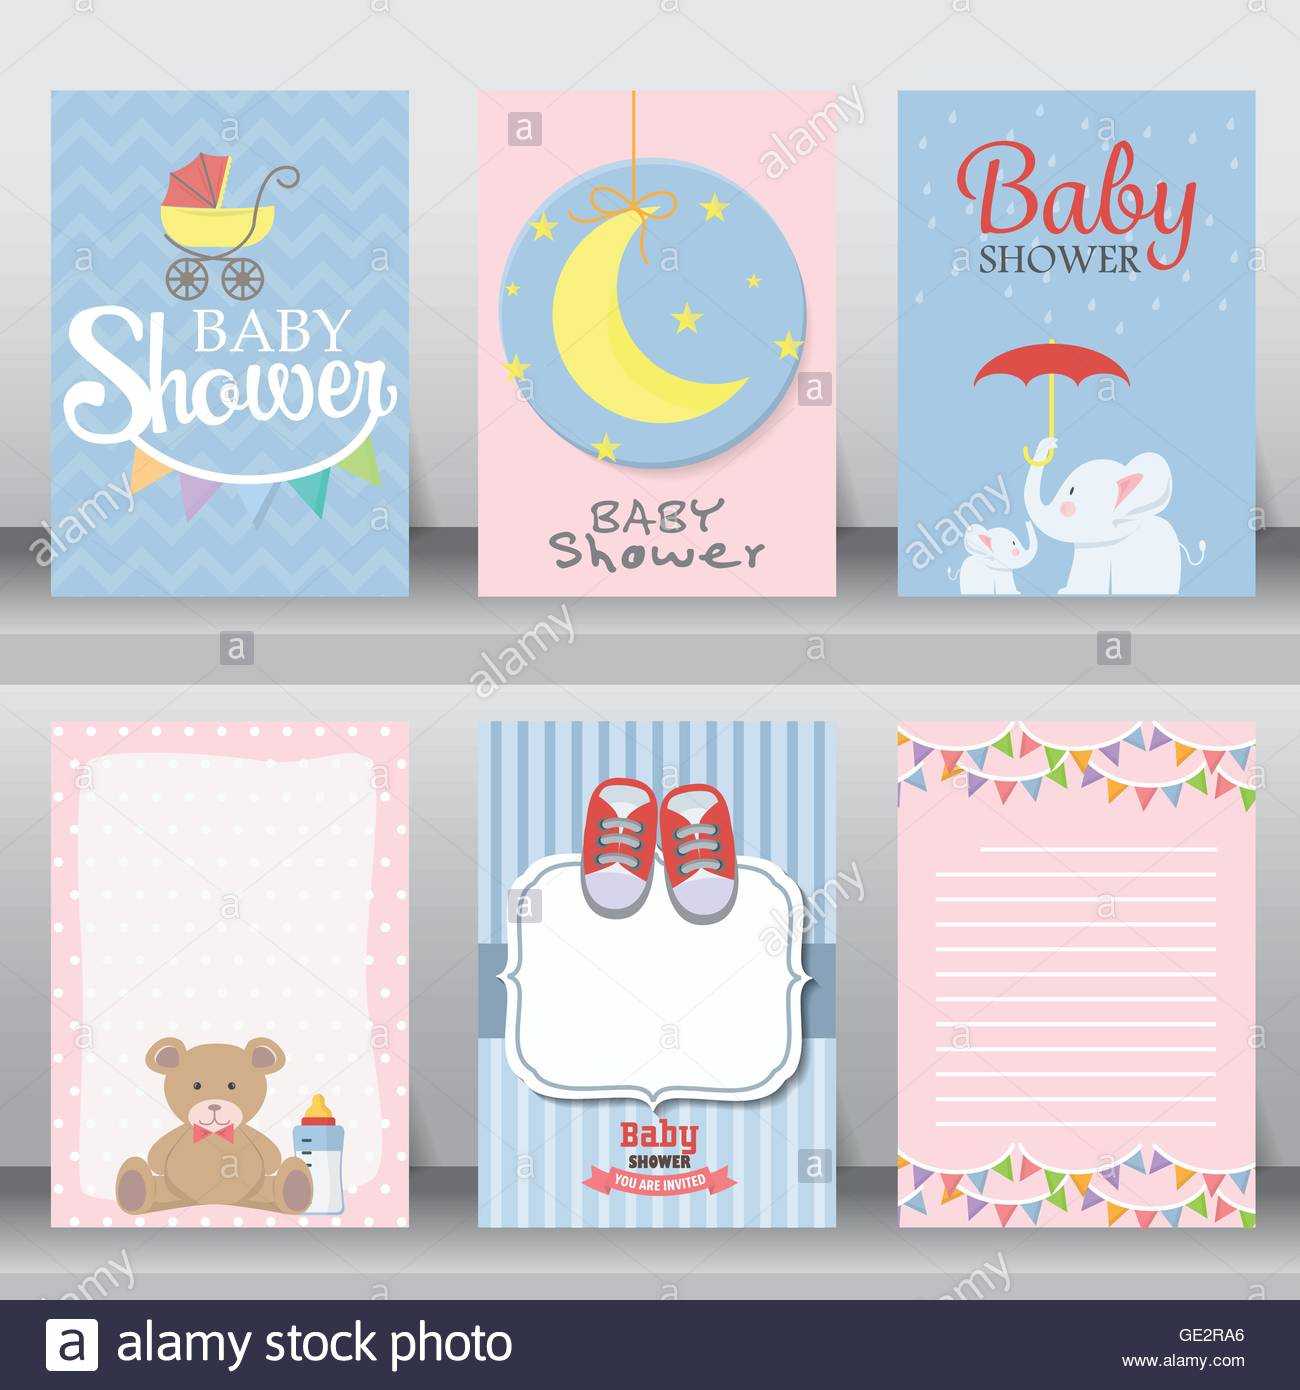 Baby Shower Party Greeting And Invitation Card. Layout Throughout Greeting Card Layout Templates